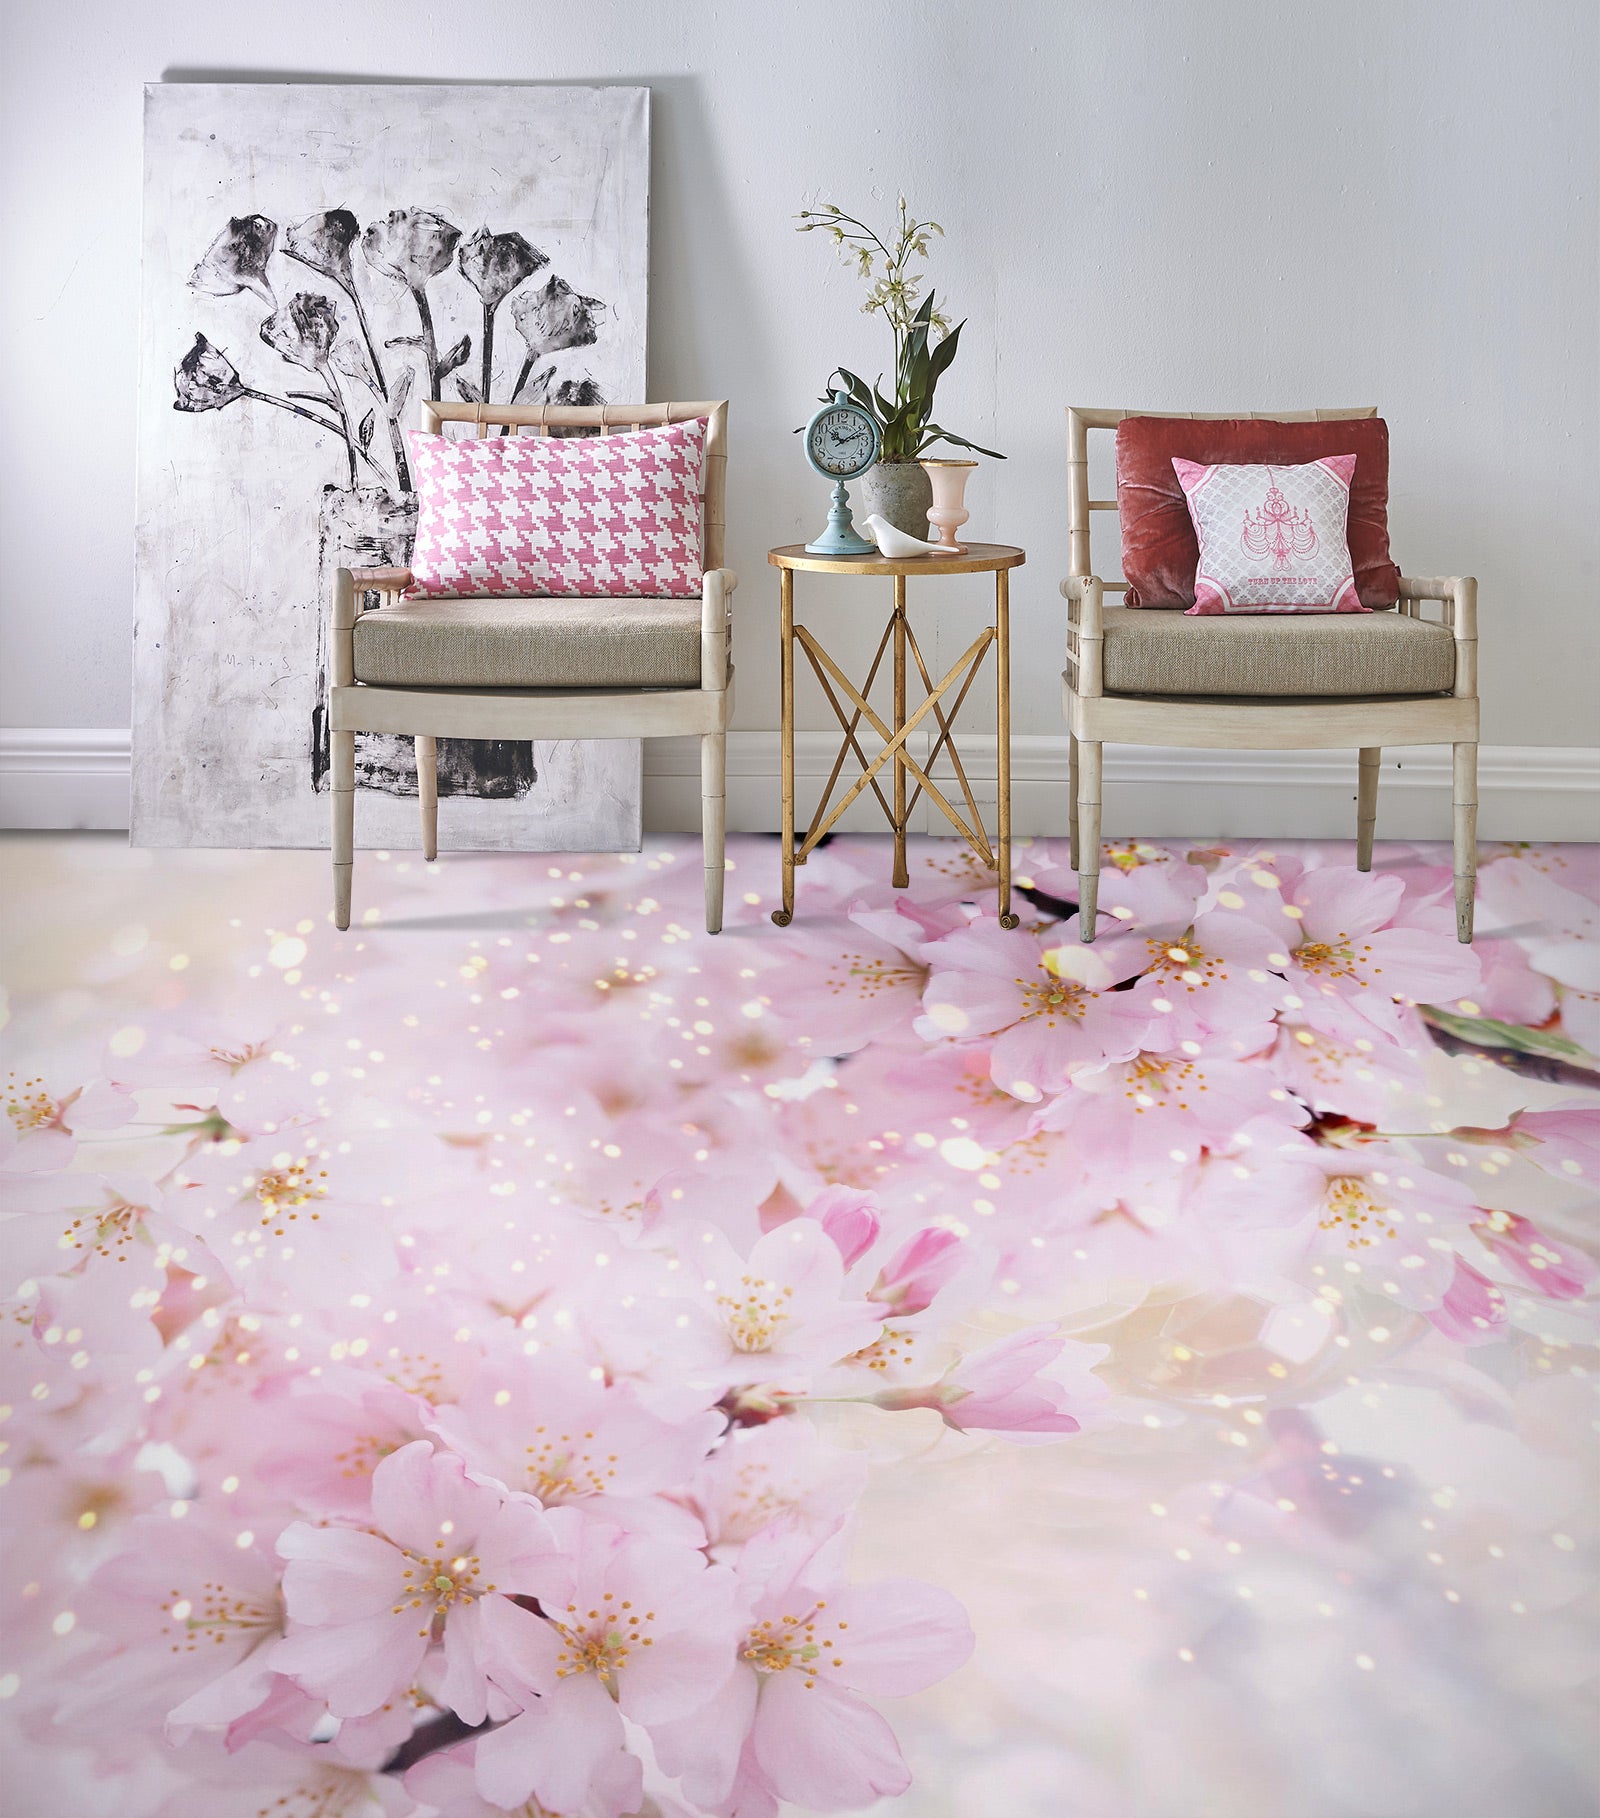 3D Charming Pink Flowers 1363 Floor Mural  Wallpaper Murals Self-Adhesive Removable Print Epoxy